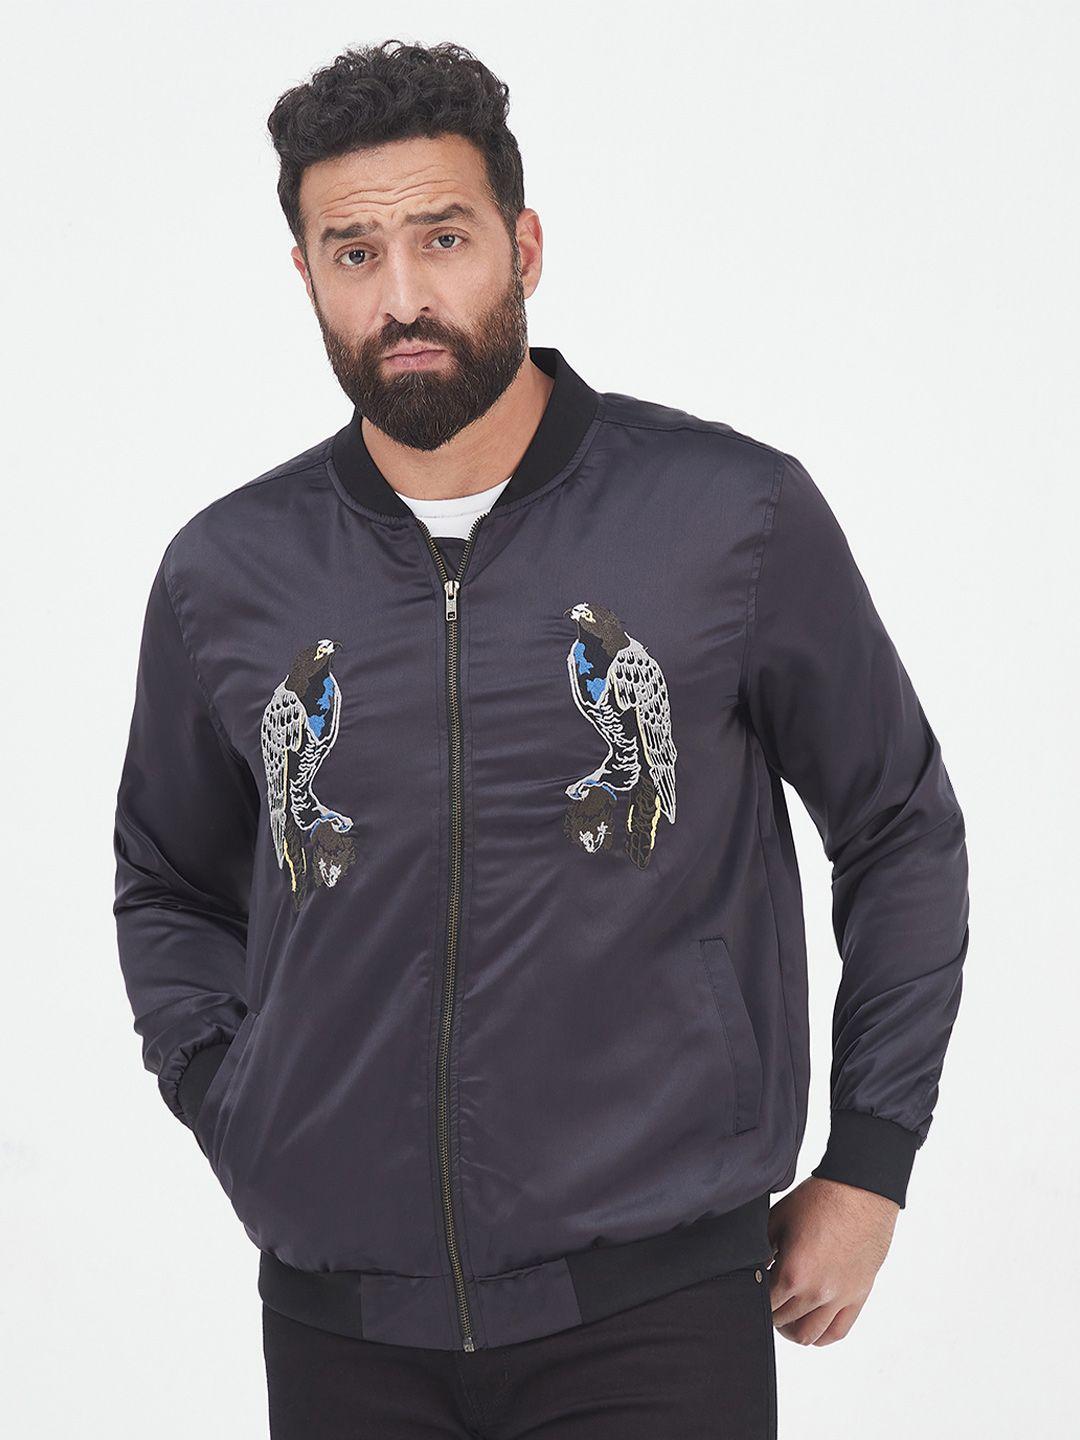 mr-button-men-bomber-jacket-with-embroidered